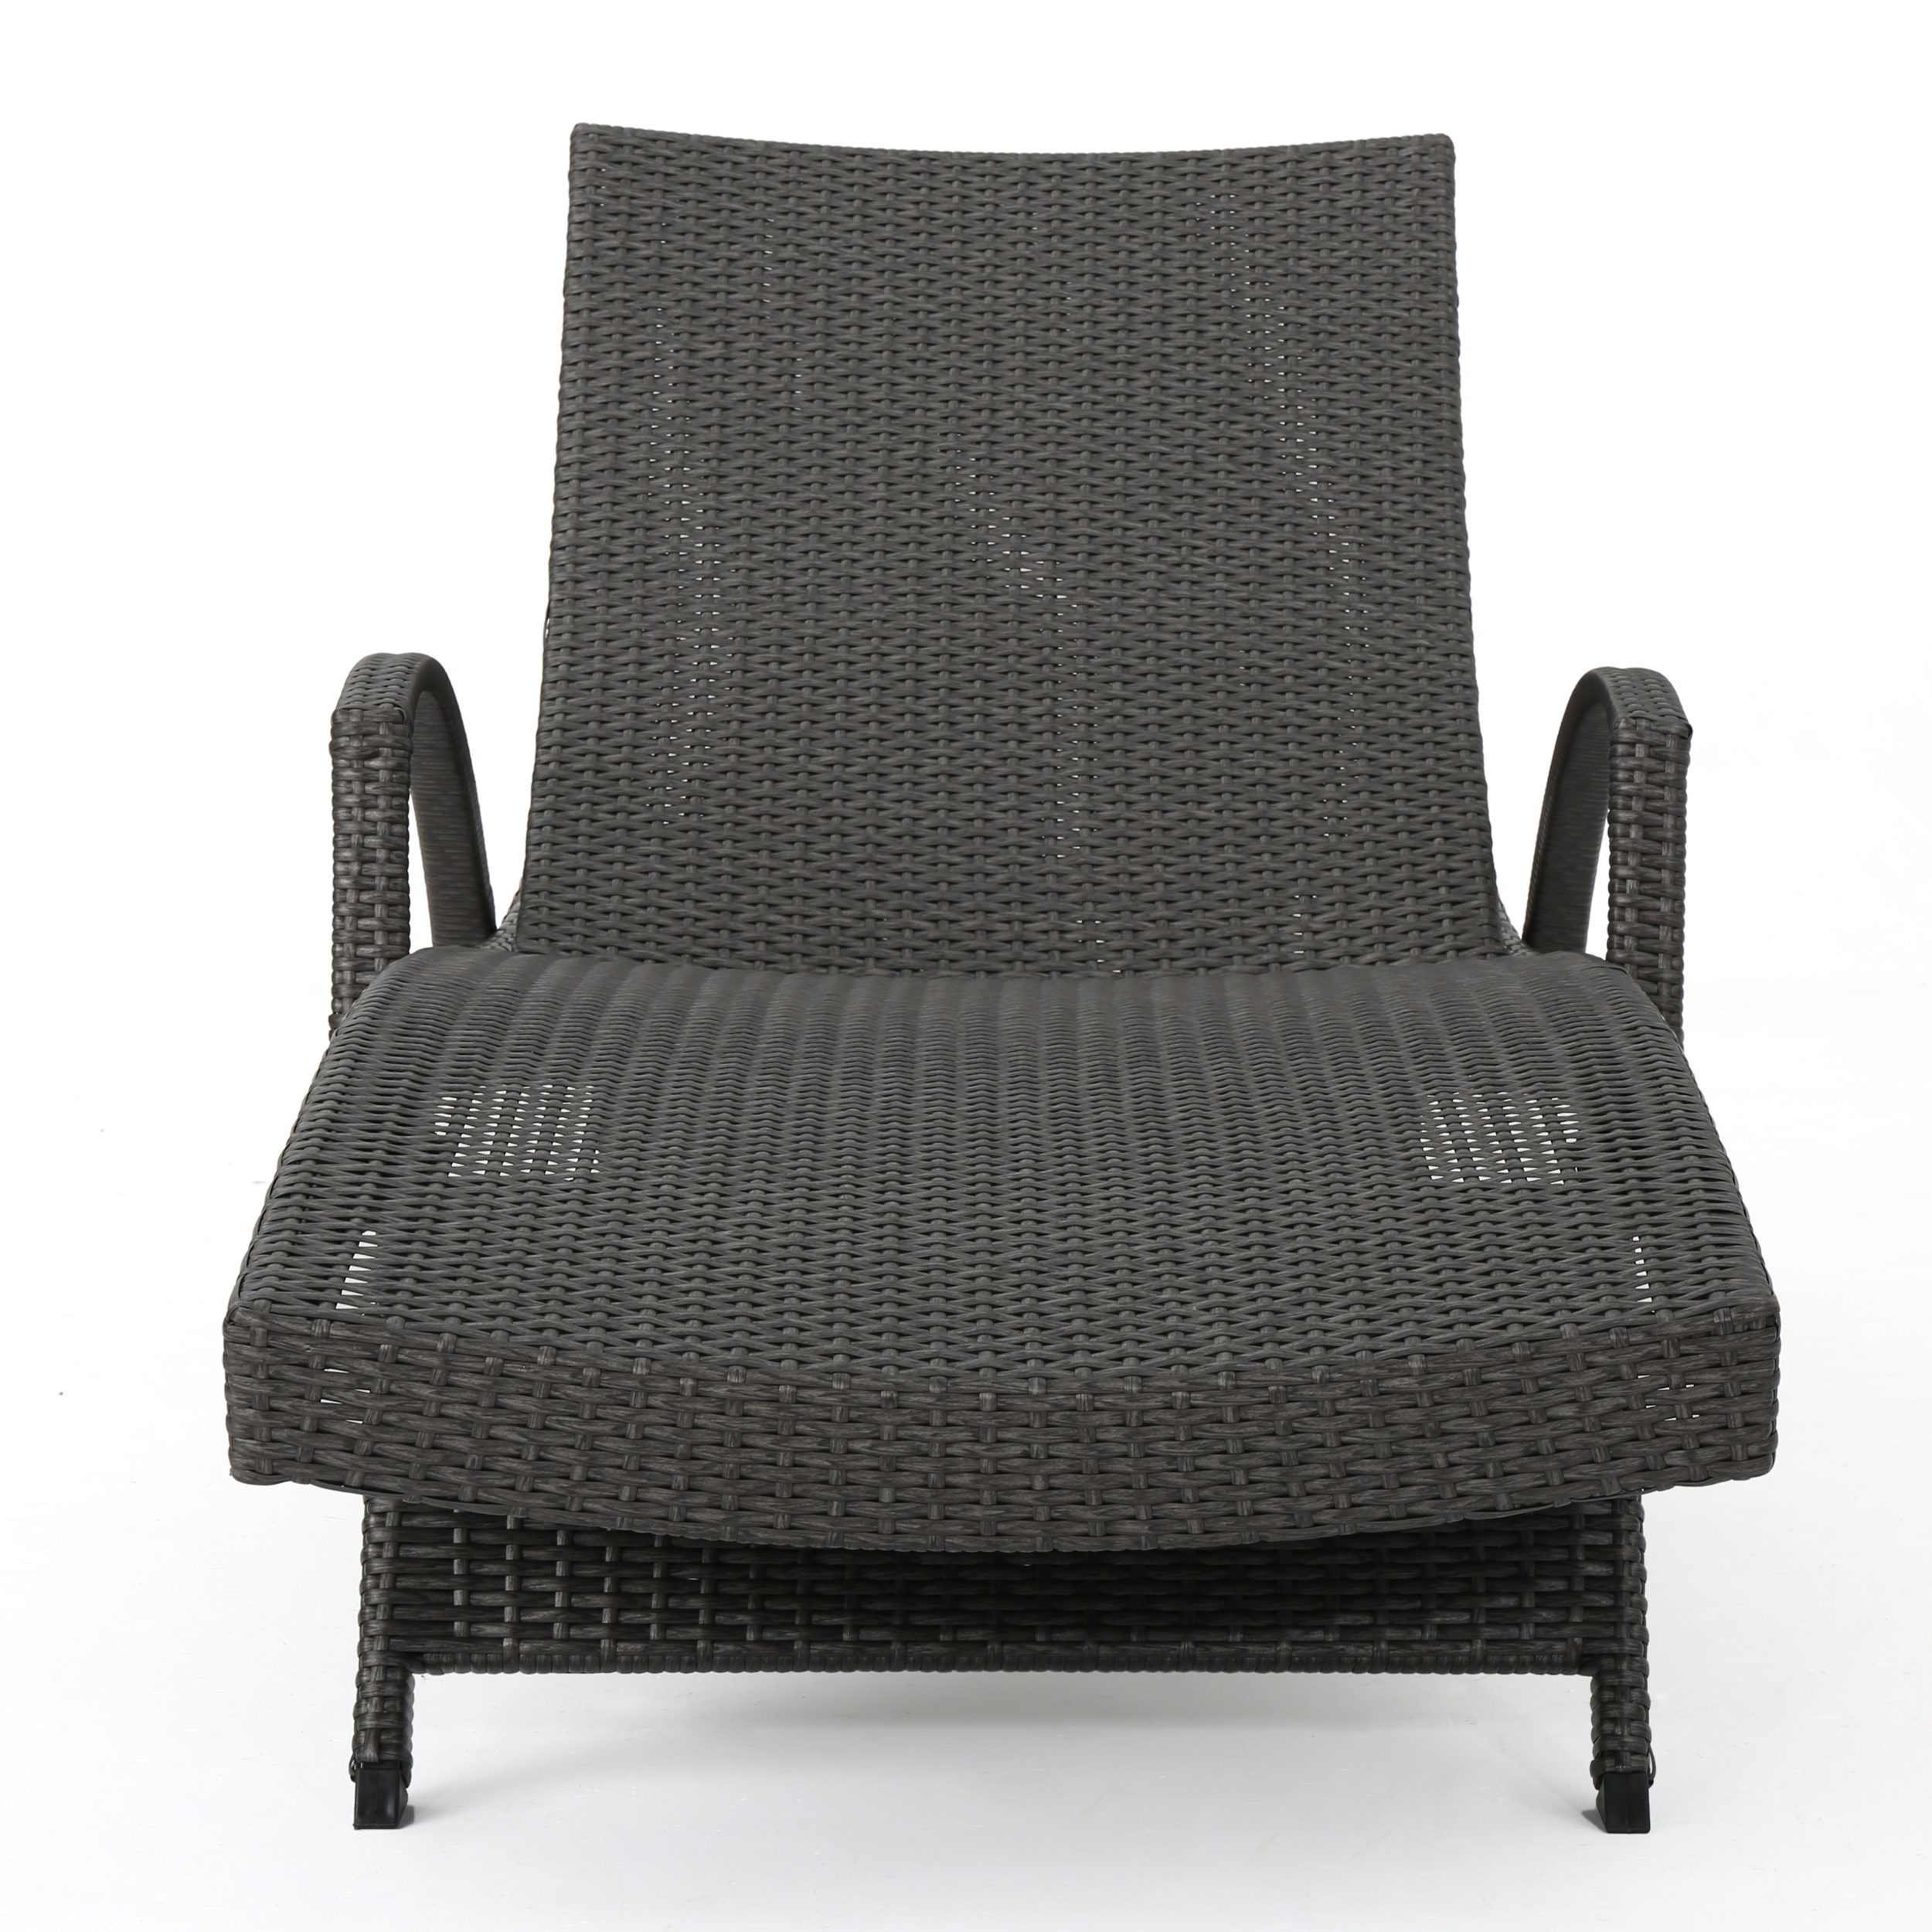 Solaris Outdoor Grey Wicker Armed Chaise Lounge with matching Wicker Accent Table, Grey - image 2 of 6